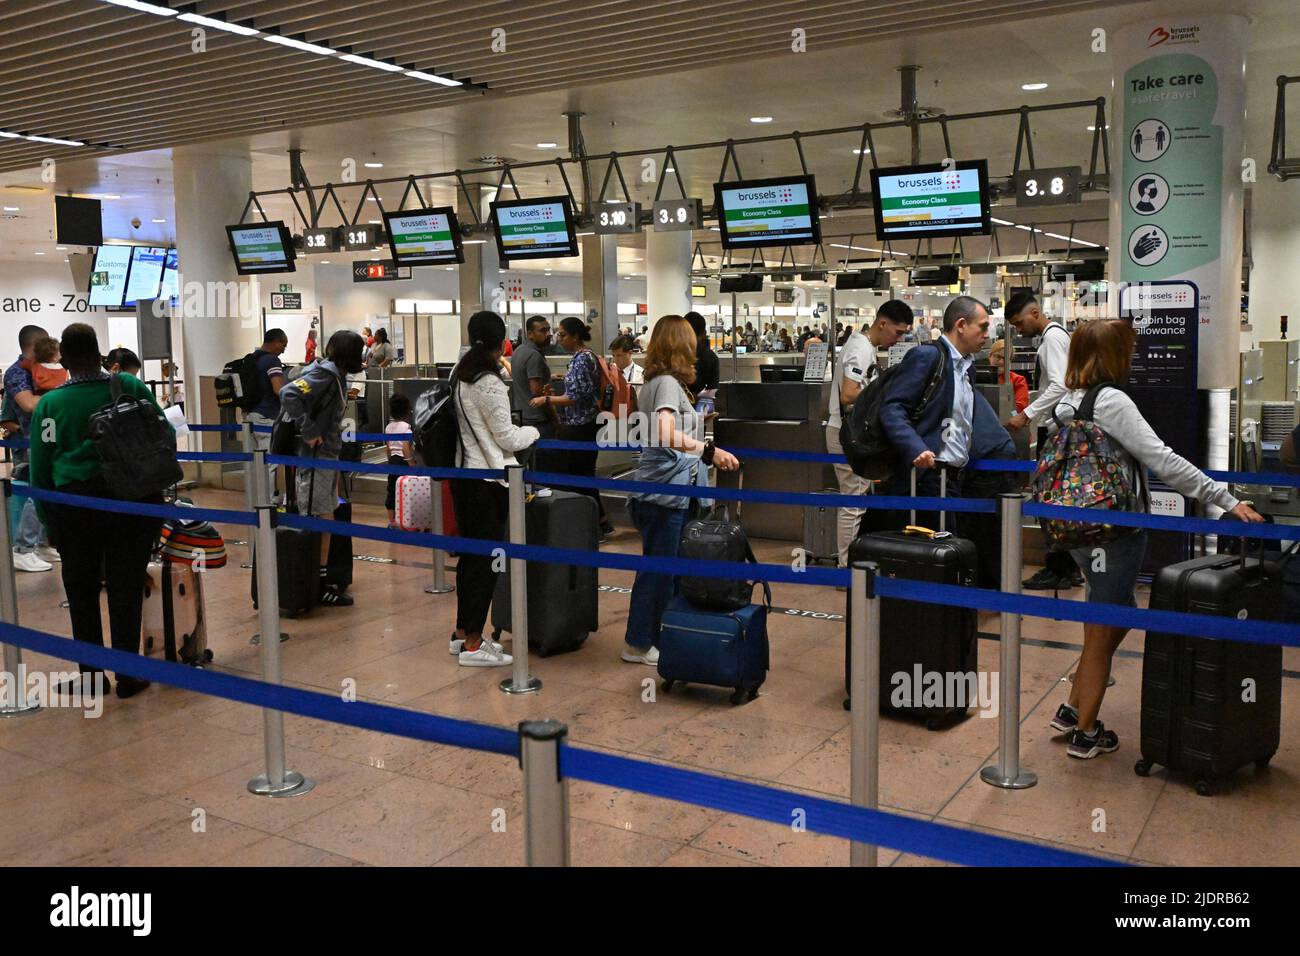 https://c8.alamy.com/comp/2JDRB62/illustration-shows-a-queue-of-travelers-in-the-departure-hall-of-brussels-airport-in-zaventem-thursday-23-june-2022-pilots-and-cabin-crew-members-of-belgian-airlines-brussels-airlines-and-of-low-cost-carrier-ryanair-start-a-three-day-strike-during-the-three-day-strike-airline-brussels-airlines-has-to-cancel-about-60-percent-of-its-scheduled-flight-schedule-315-flights-have-been-cancelled-40000-passengers-have-been-affected-the-cabin-crew-and-pilots-go-on-strike-against-among-other-things-the-work-pressure-that-they-esteem-too-high-ryanair-is-thought-to-cancel-at-least-180-flights-b-2JDRB62.jpg